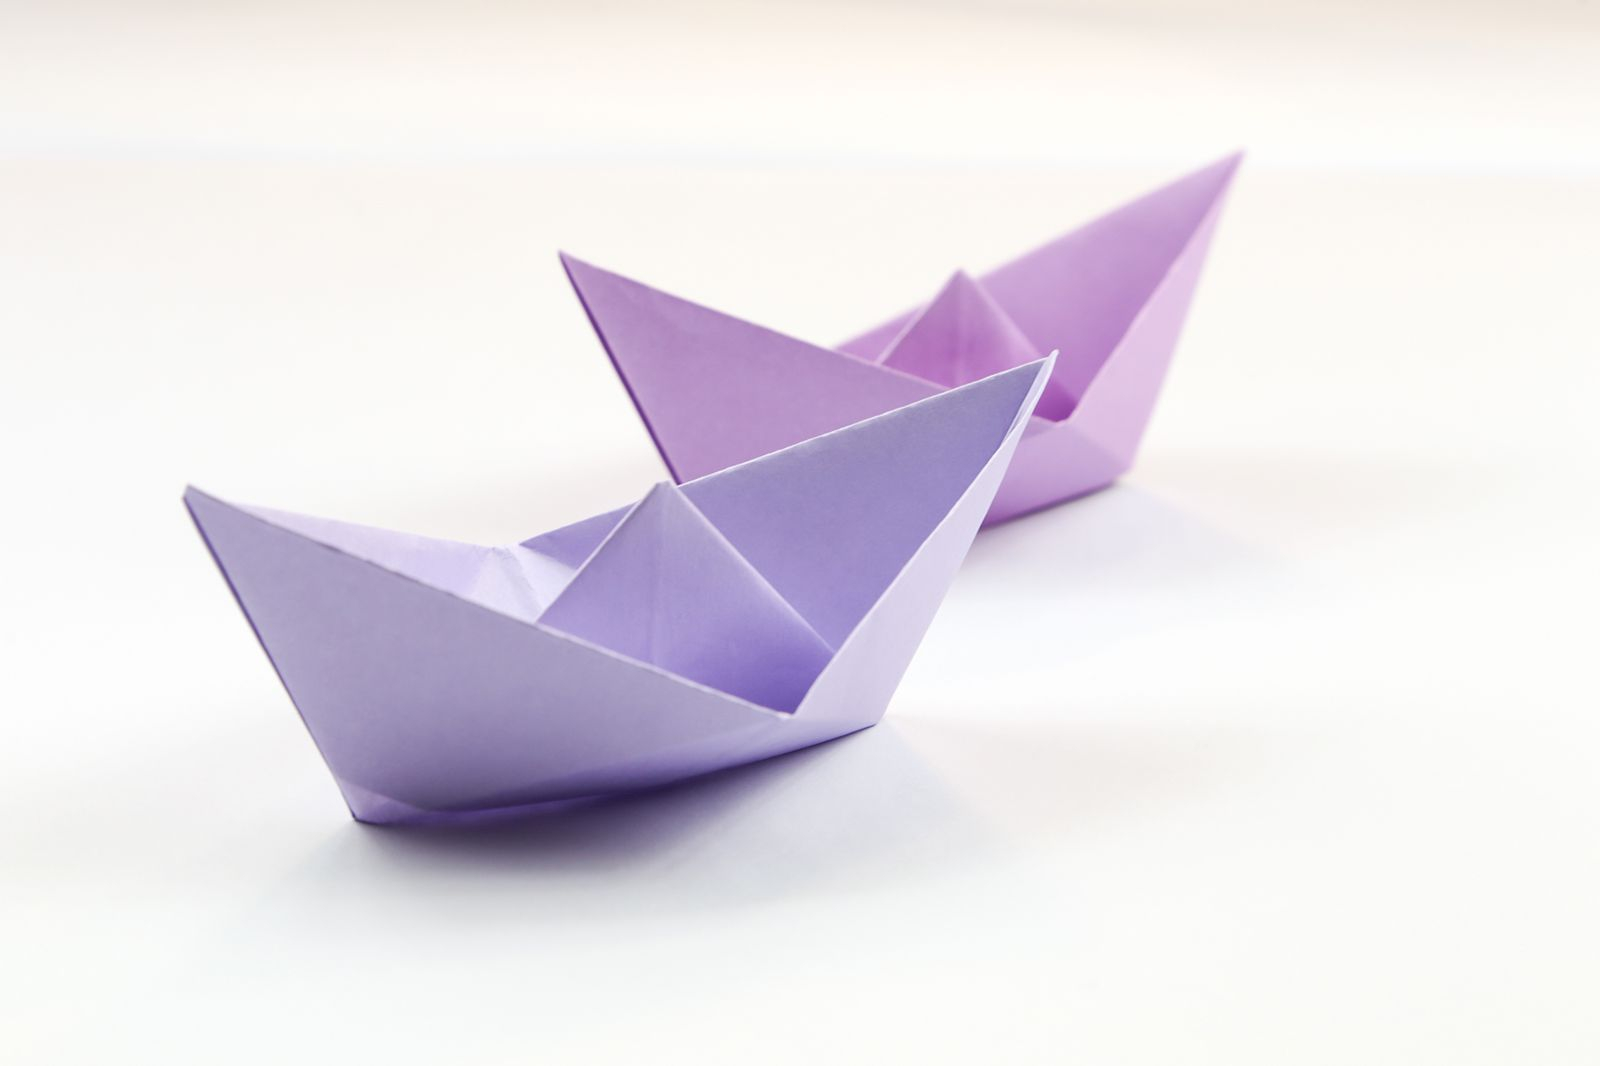 Origami For Kindergarteners How To Make An Easy Origami Boat